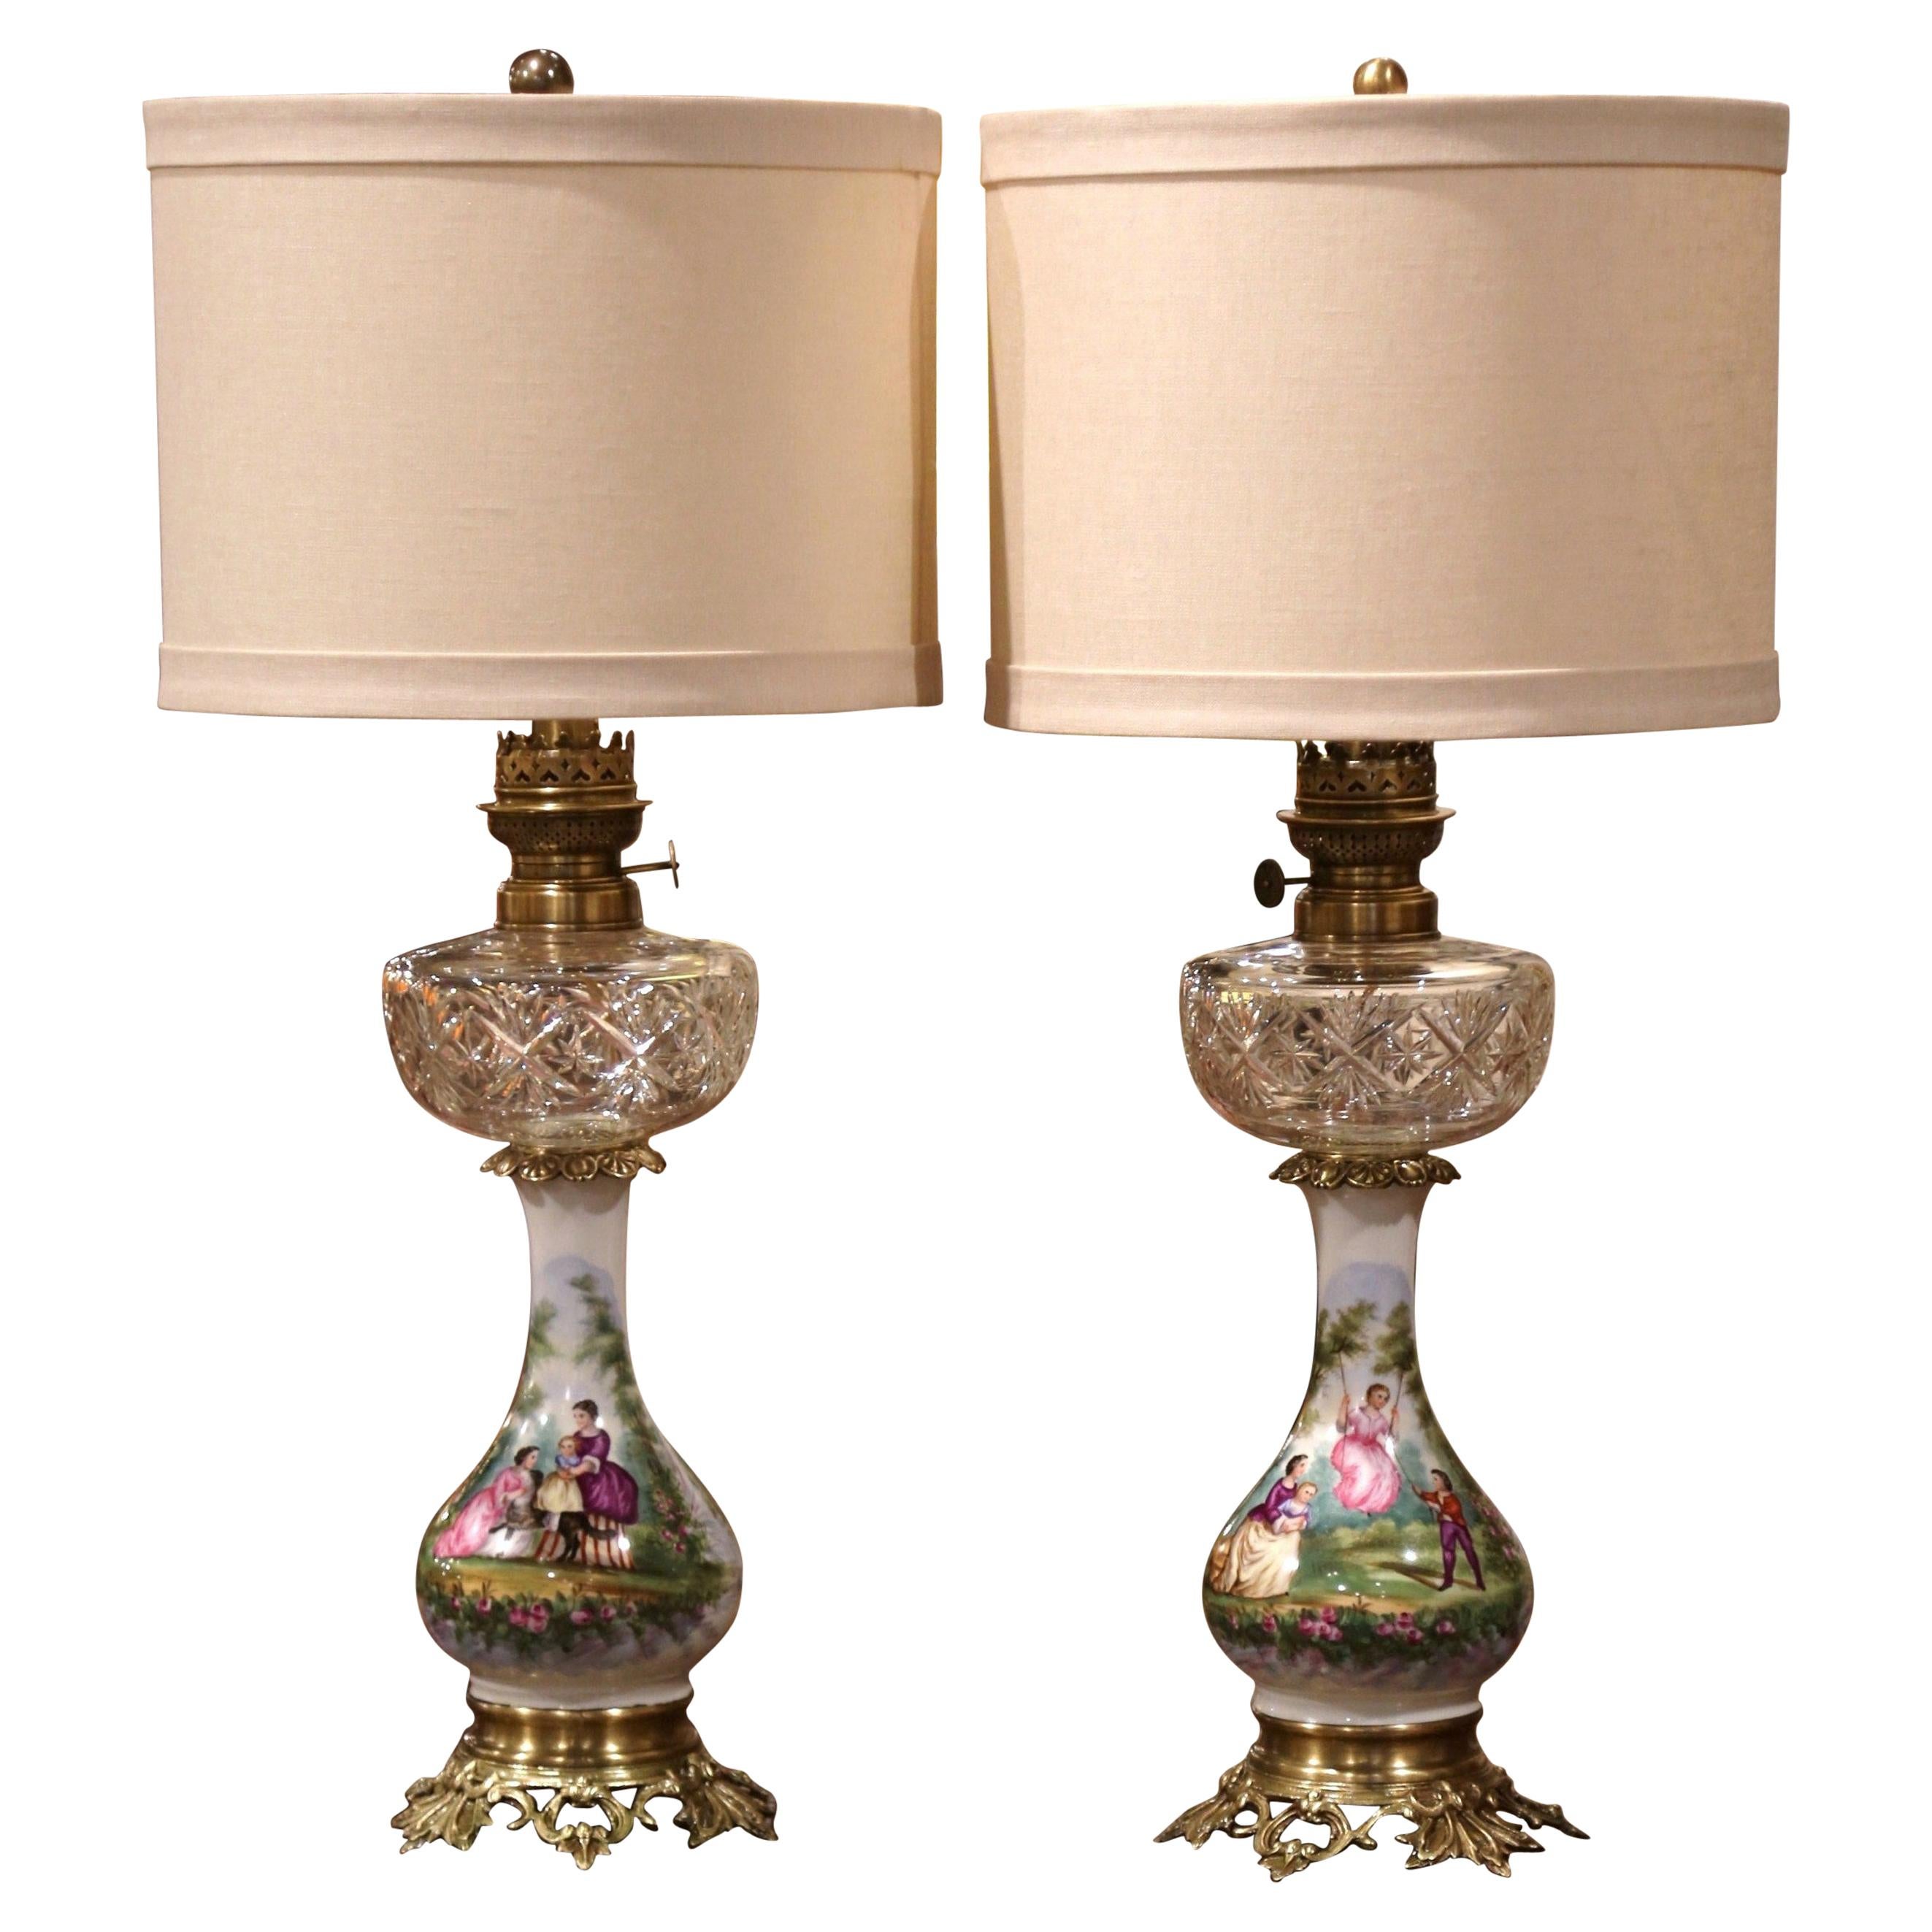 Pair of 19th Century French Porcelain, Bronze, Brass and Cut Glass Table Lamps